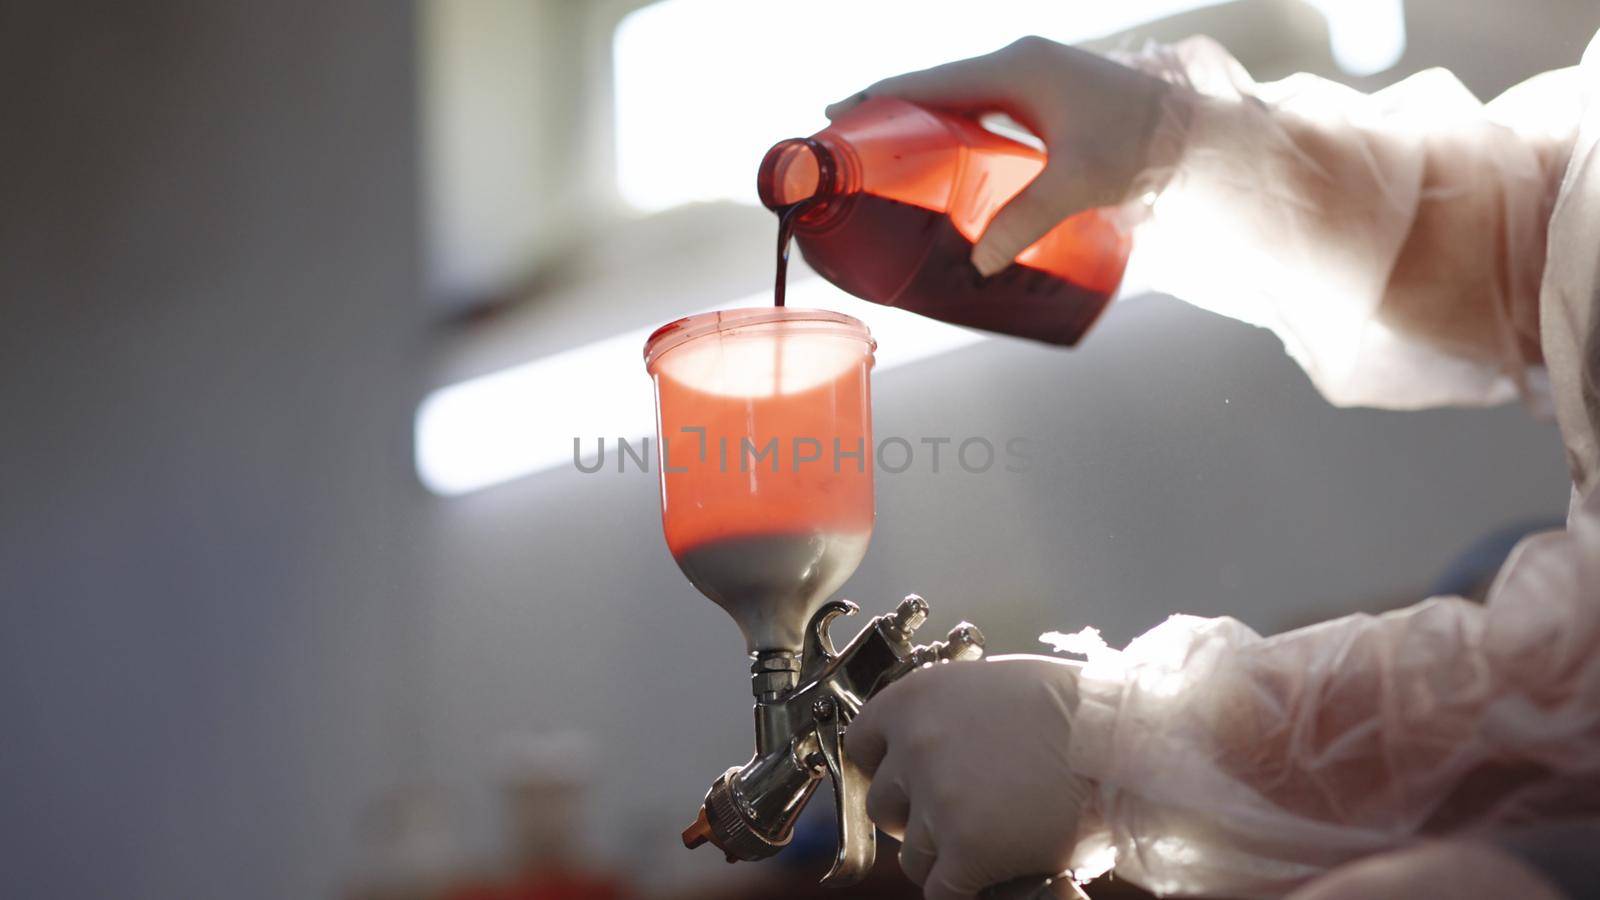 Red paint for car painting. Spray gun for car painting. Industrial spray painting process. Paint-spraying gun is getting used by the worker to colour the car. Car painting with professional spray gun